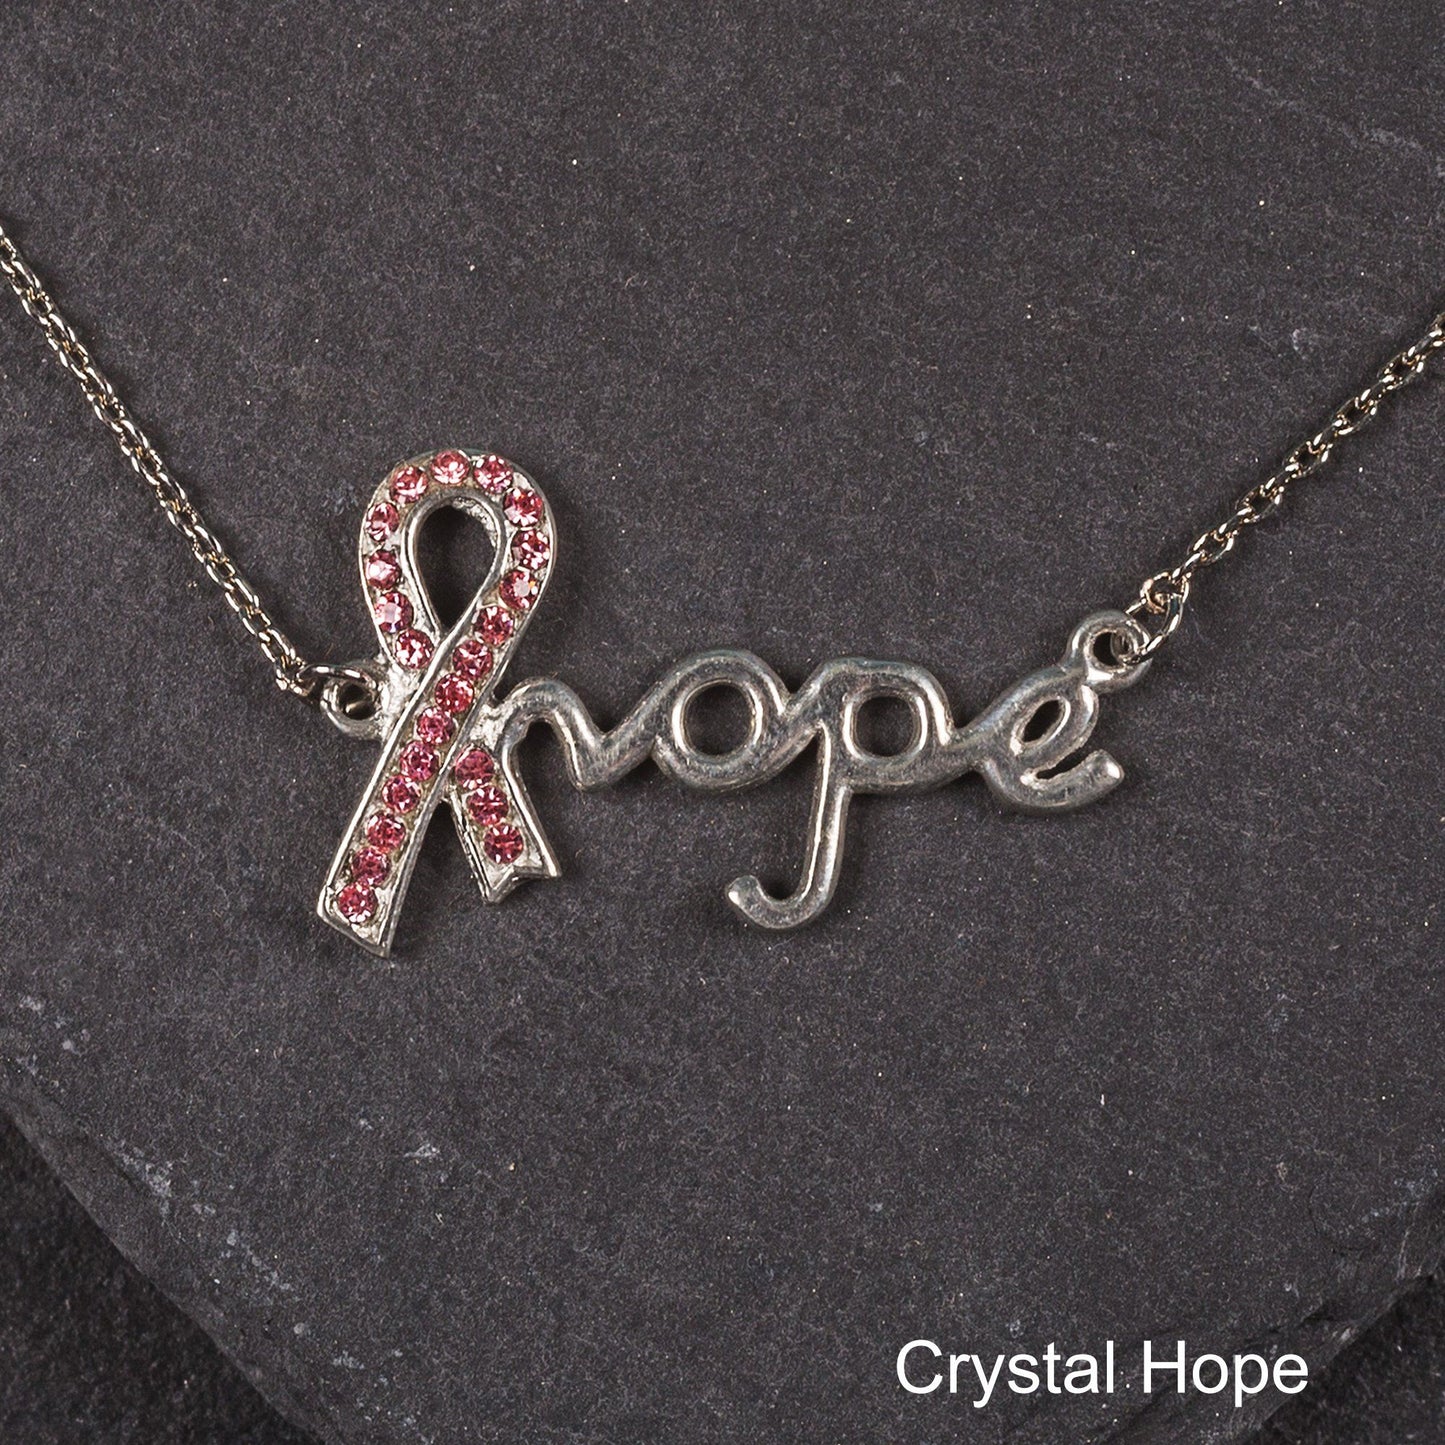 Crystal Hope Pewter Necklace!